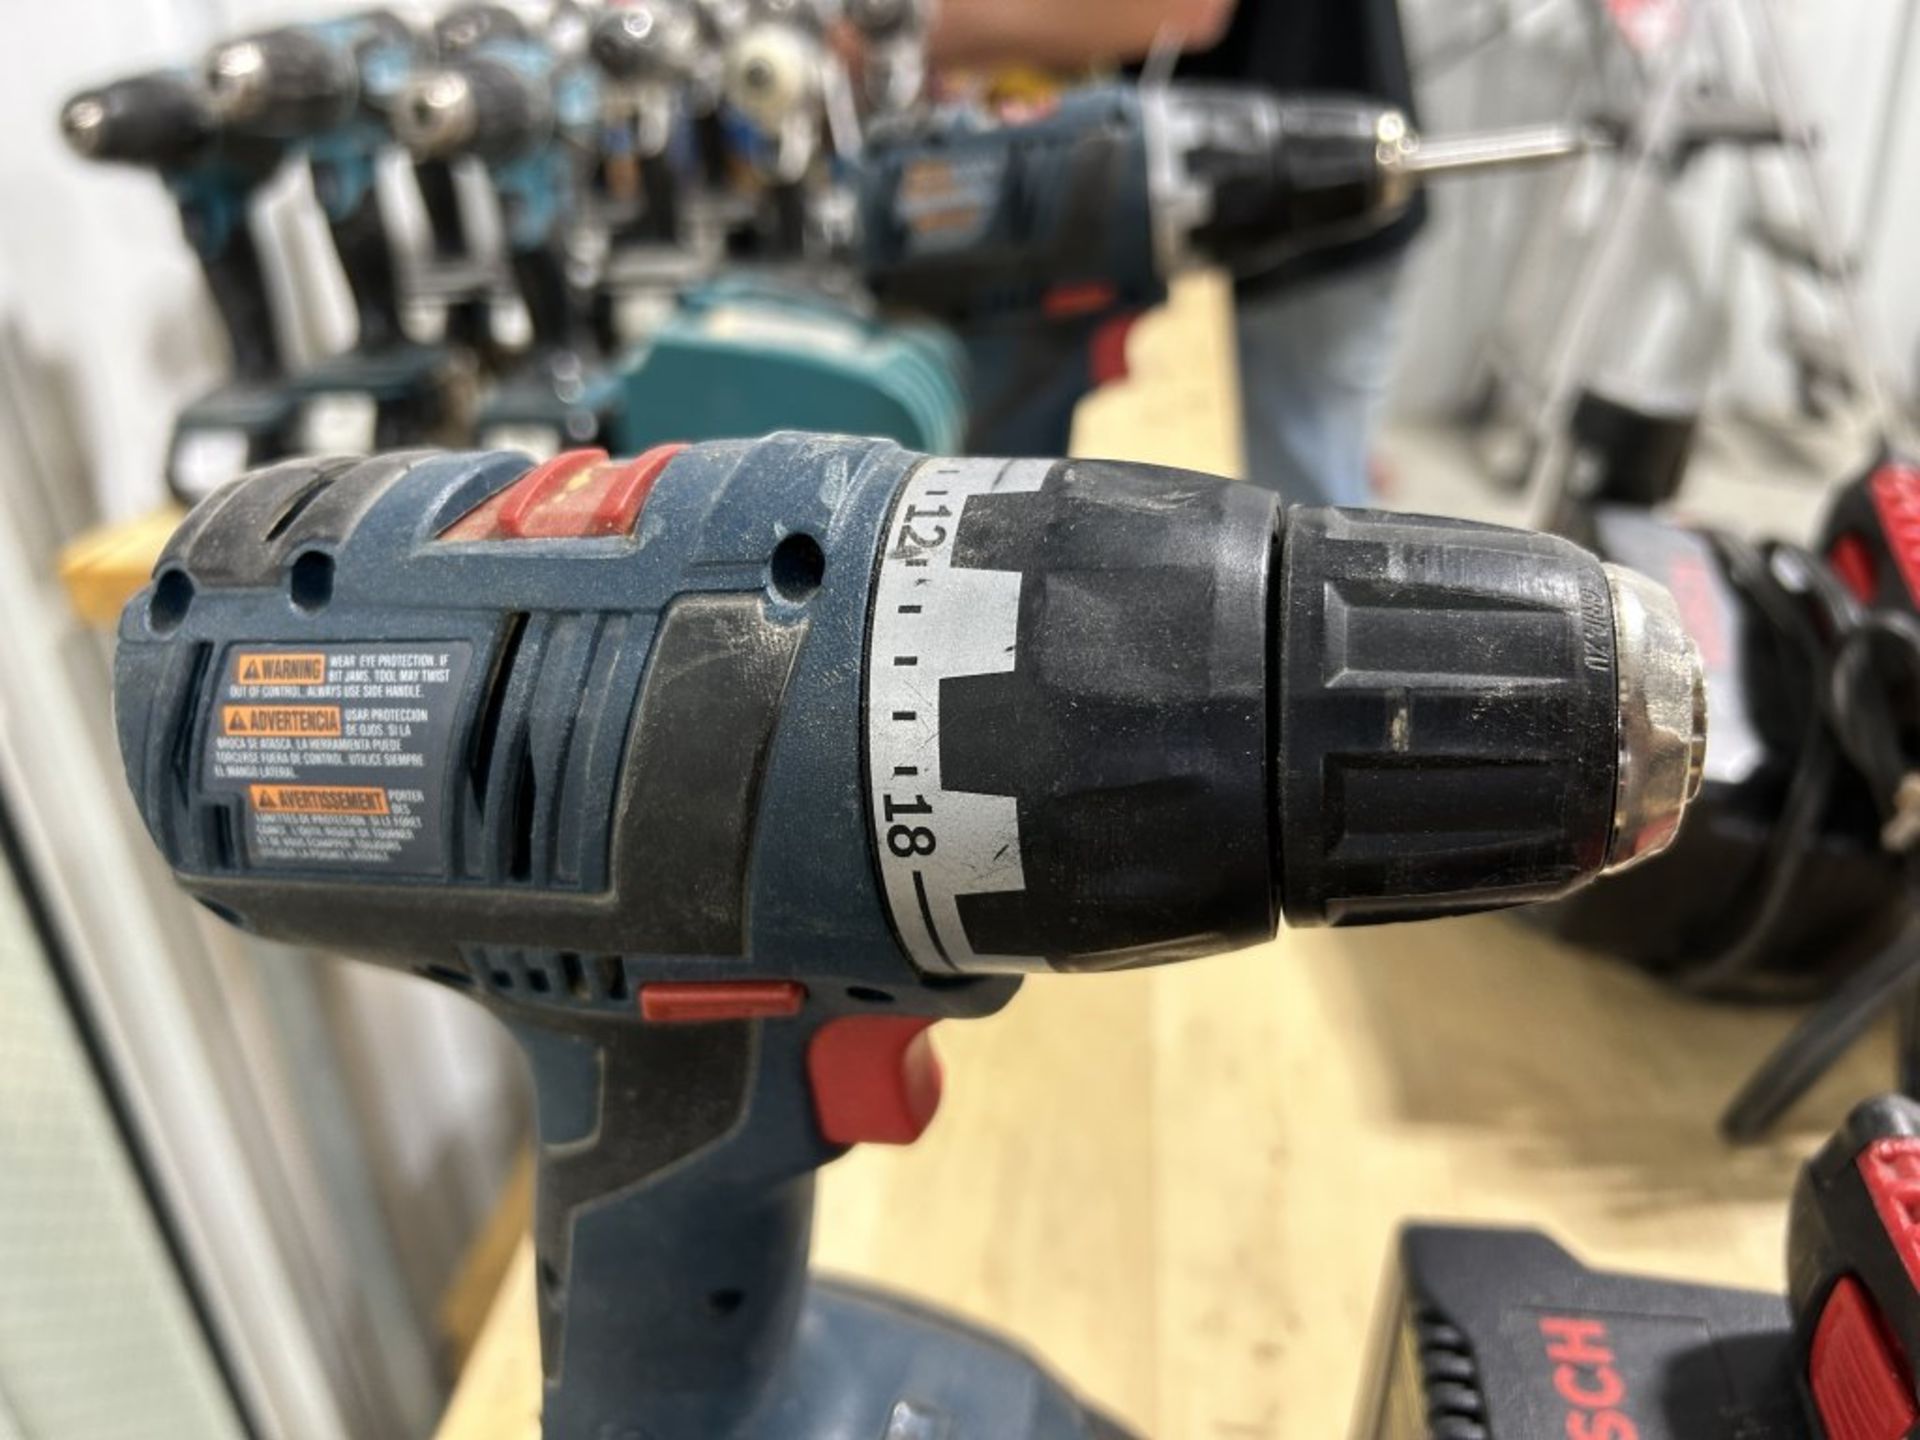 BOSCH LITHIUM ION 18V & 12V CORDLESS DRILLS, EACH WITH 2 BATTERIES AND CHARGER - Image 2 of 3